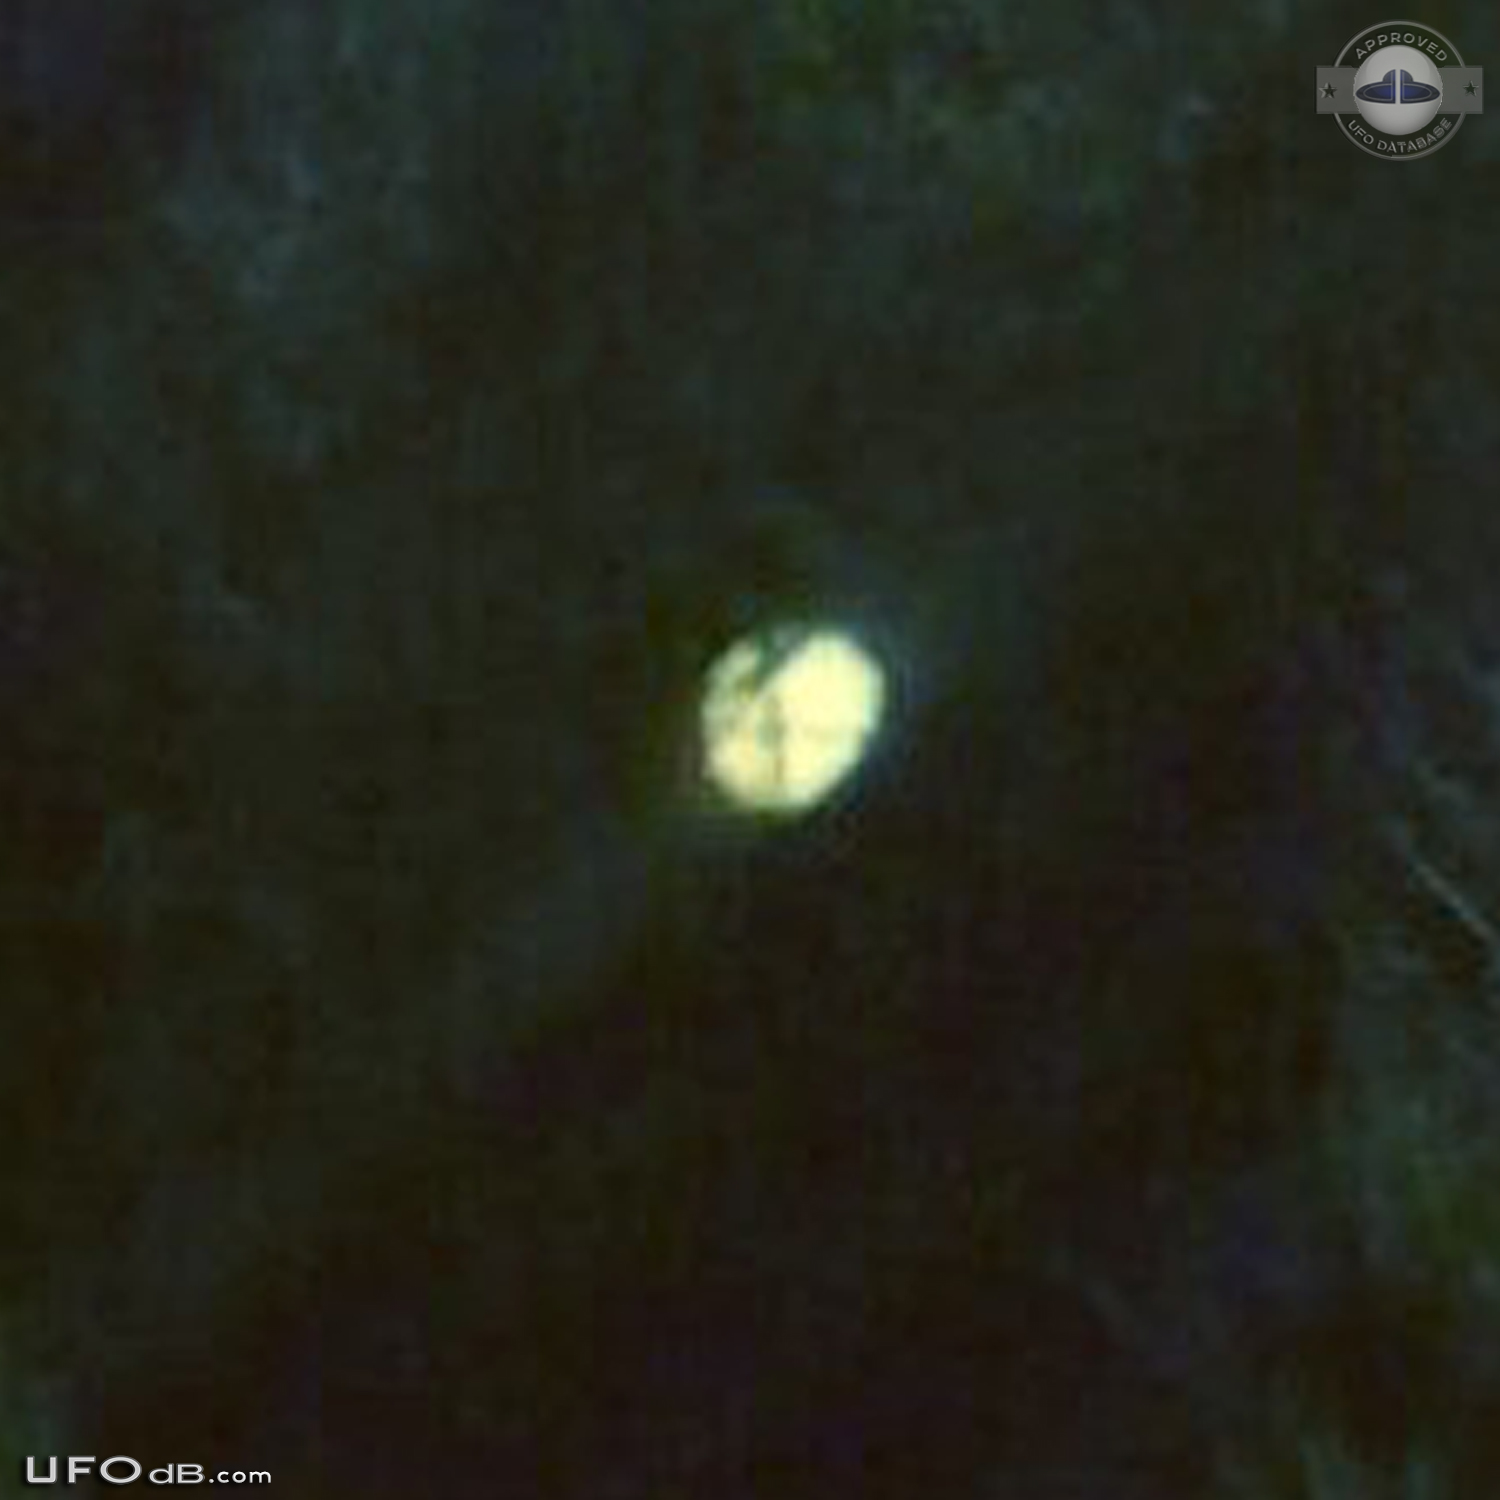 Silent Gold Disc UFO caught on picture - Rhenen, the Netherlands 2014 UFO Picture #572-3